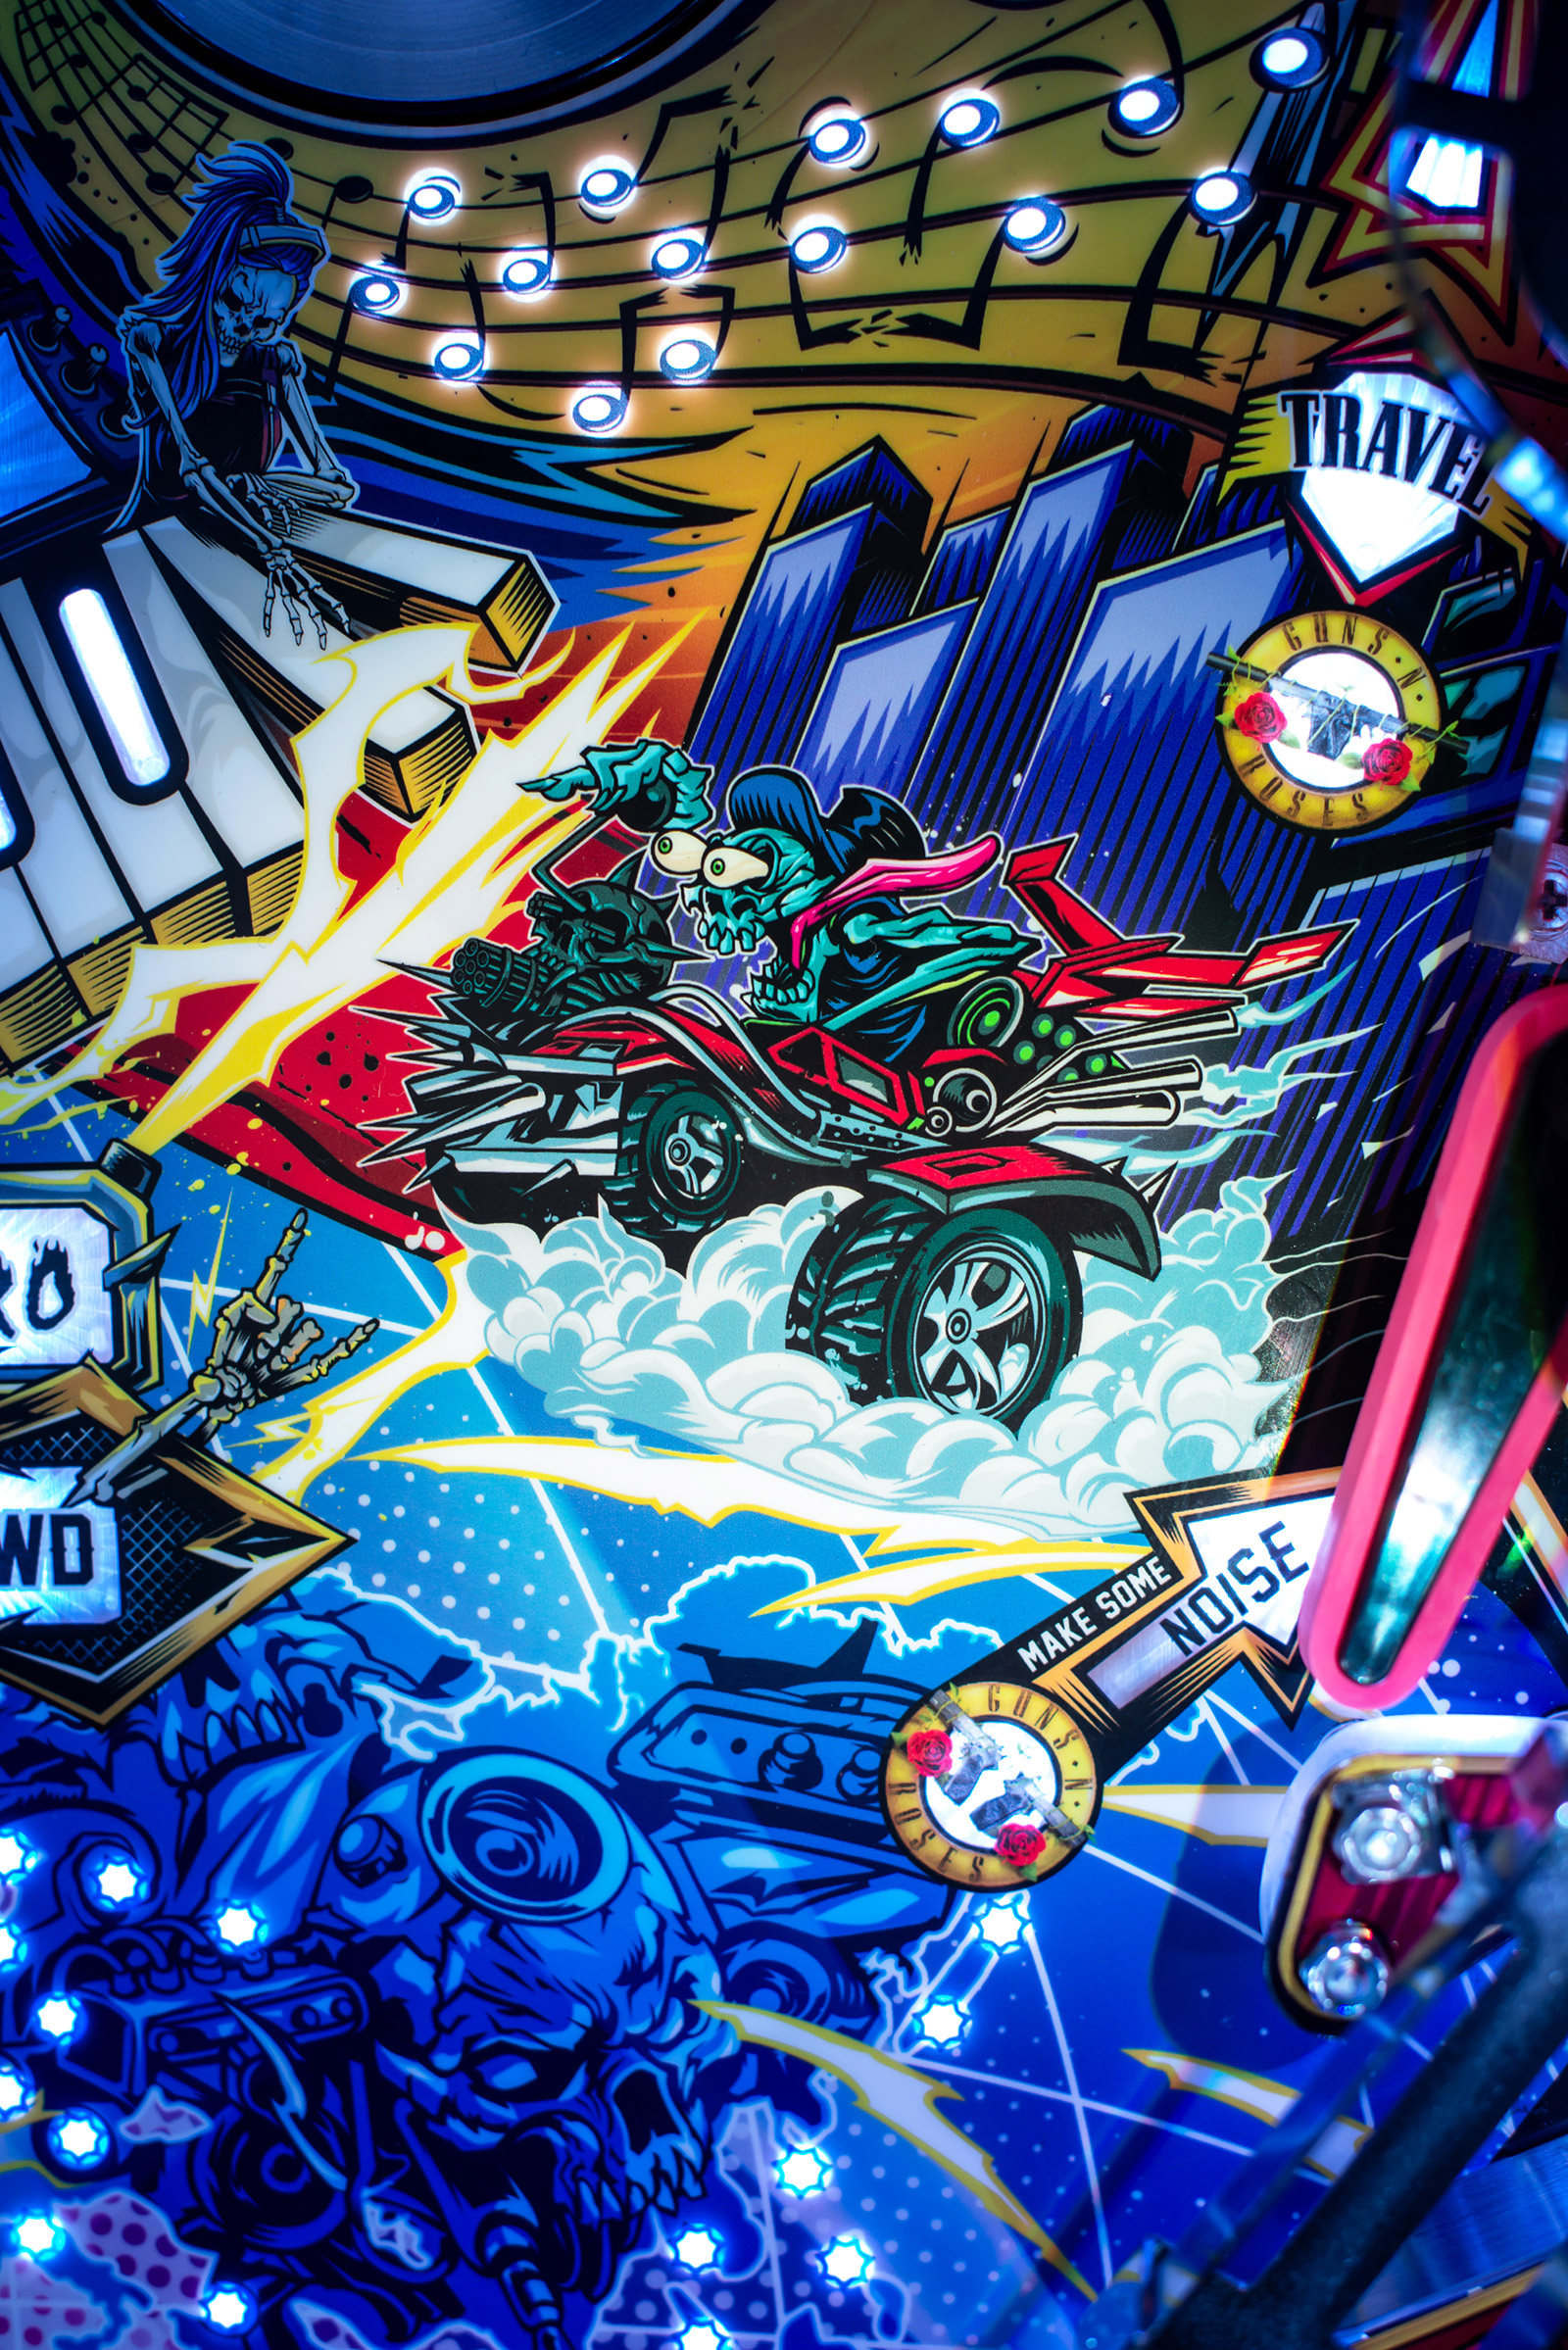 JJP'S GUNS N' ROSES REVEALED – Welcome to Pinball News – First & Free